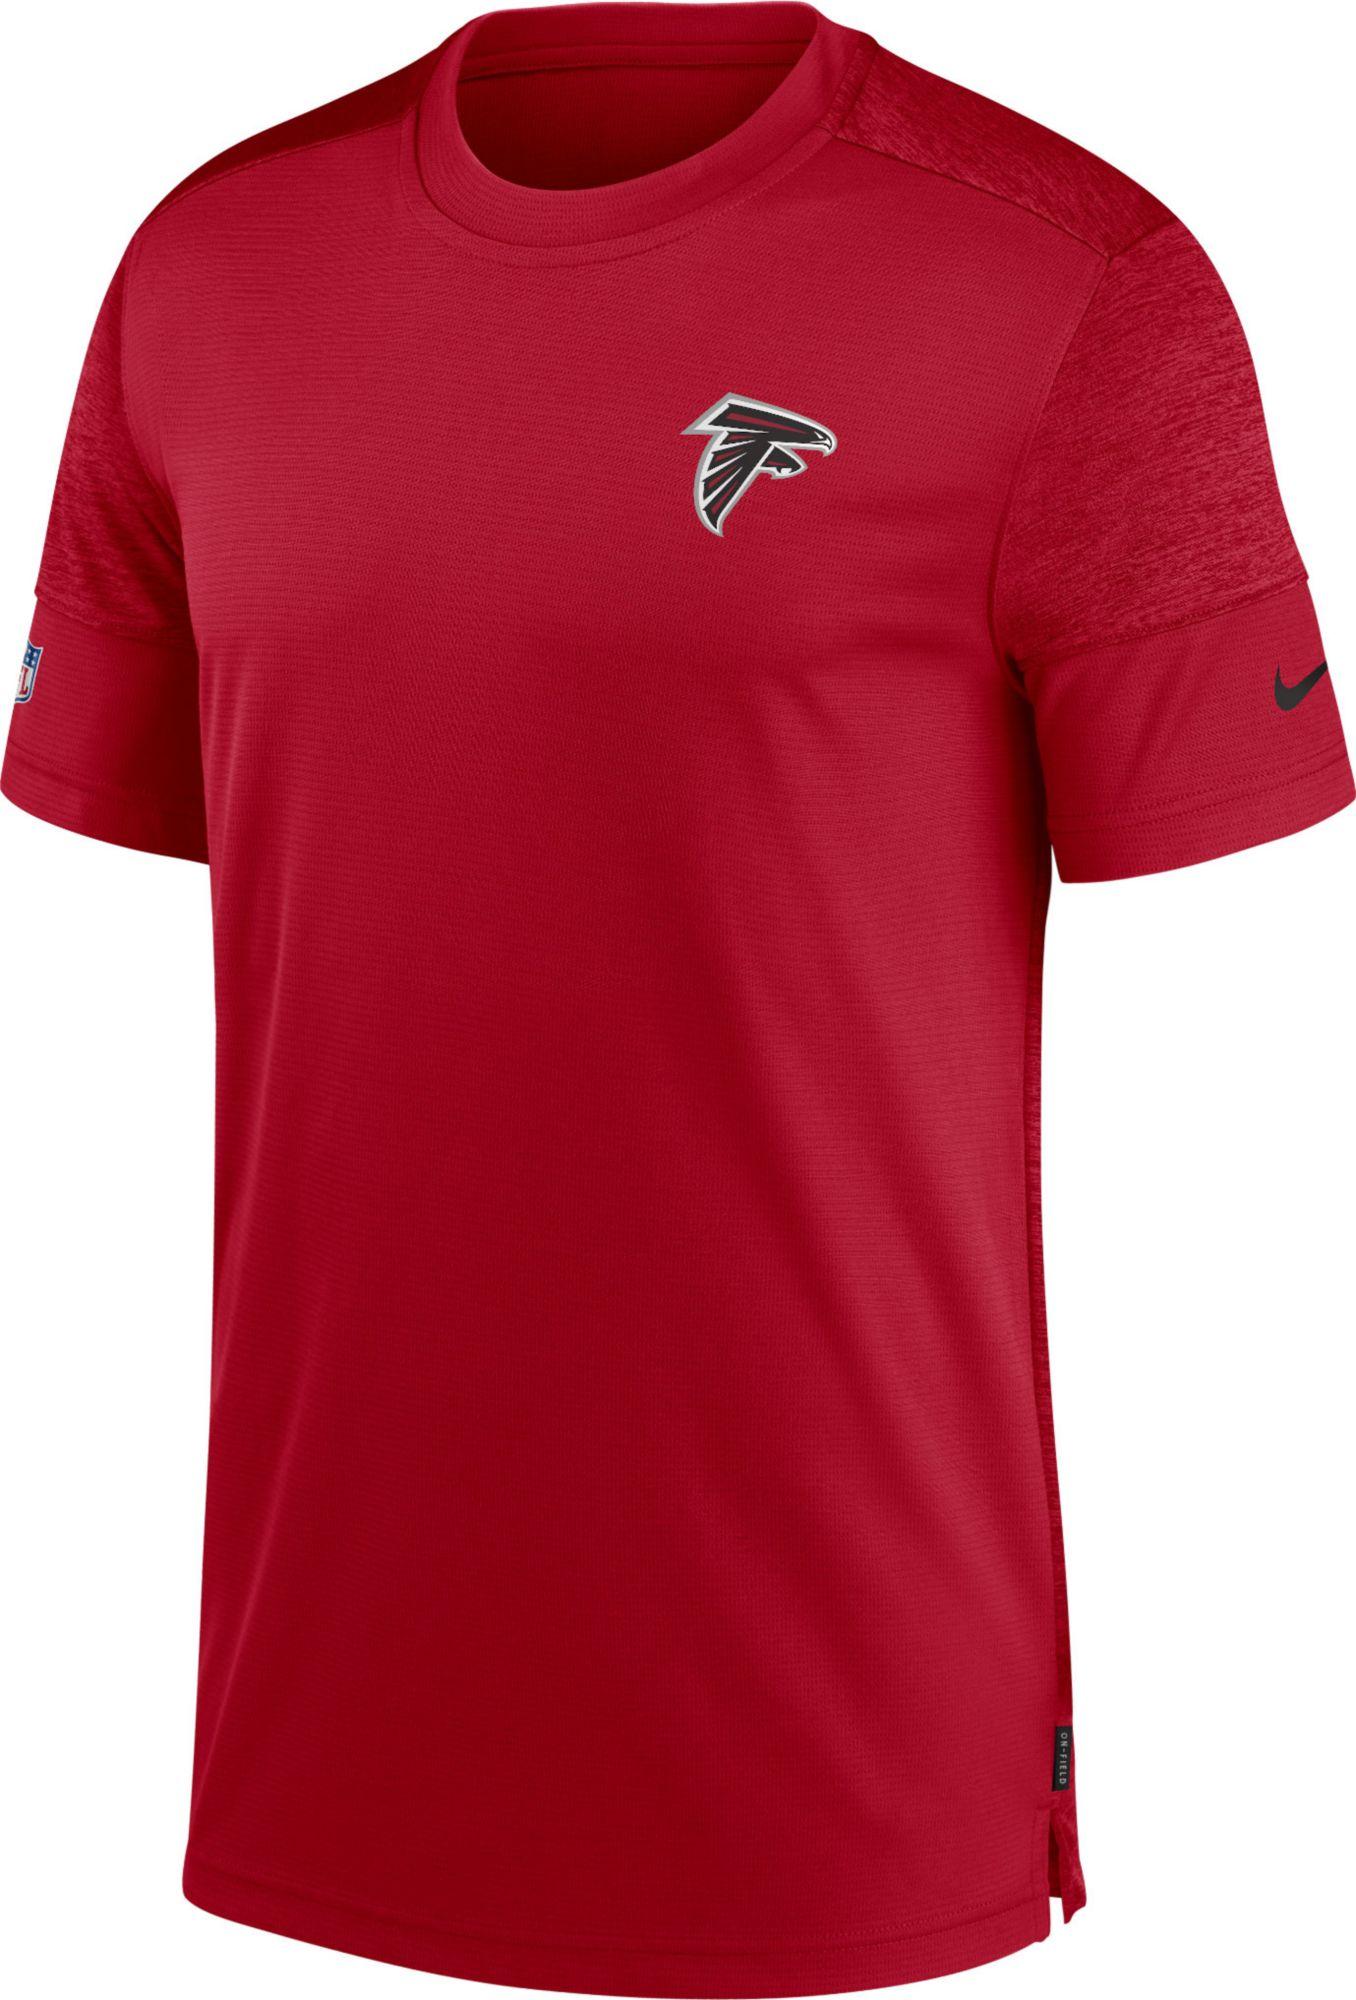 Nike Atlanta Falcons Coaches Sideline Shirt in Red for Men - Lyst